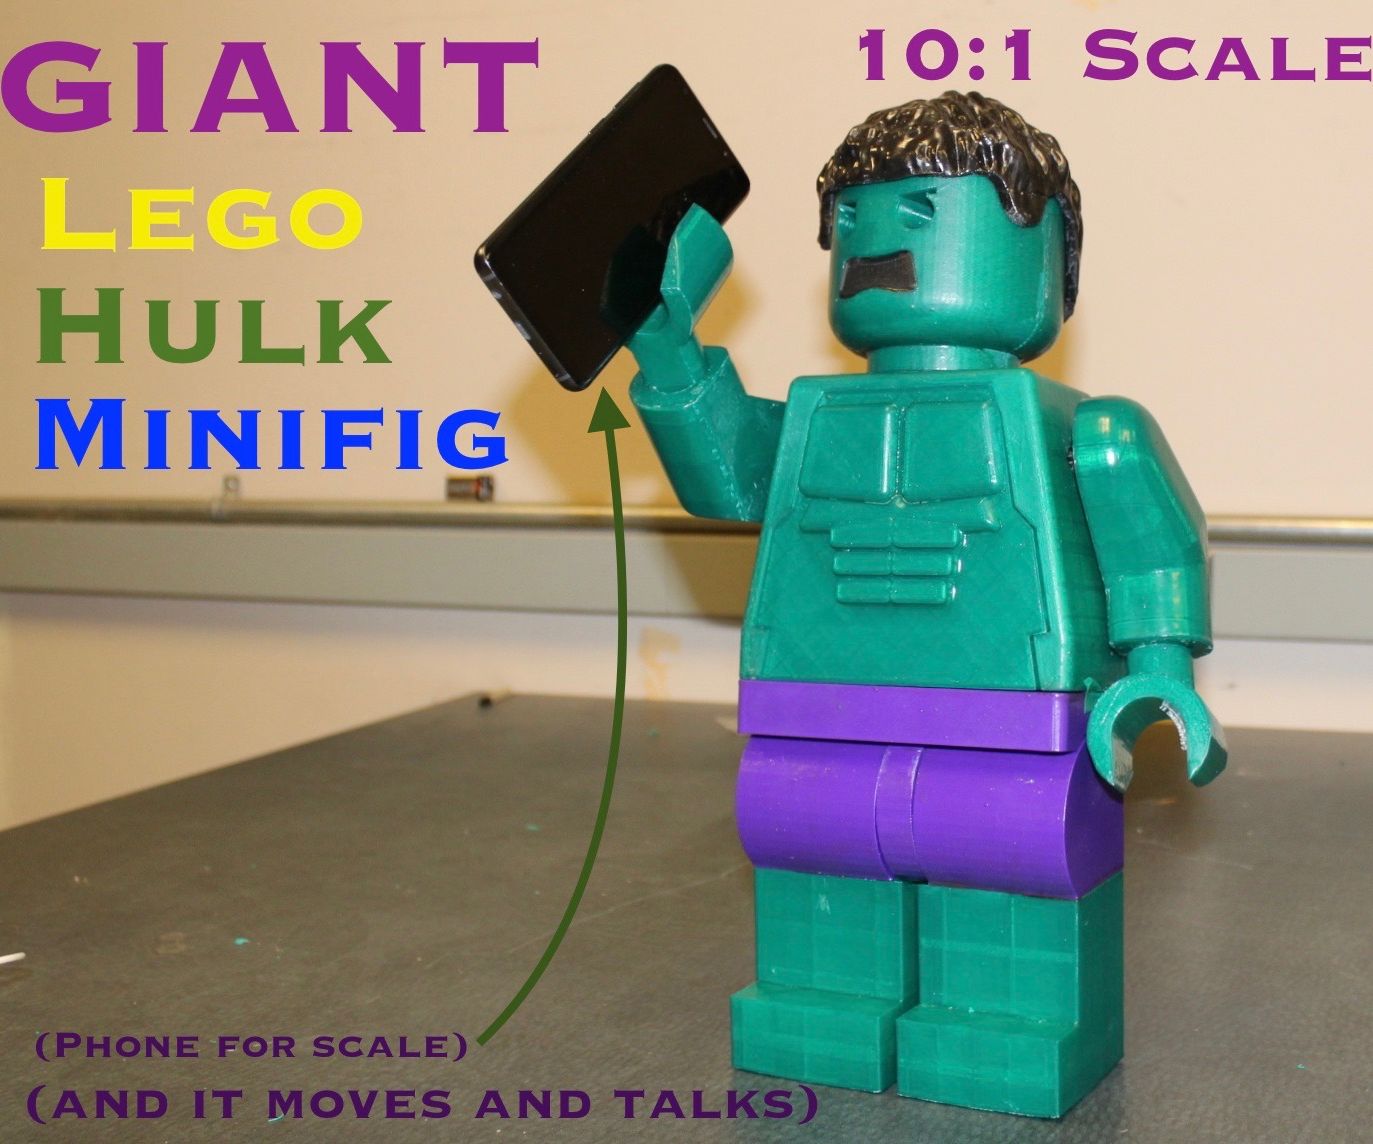 Moving and Talking Giant Lego Hulk MiniFig (10:1 Scale)